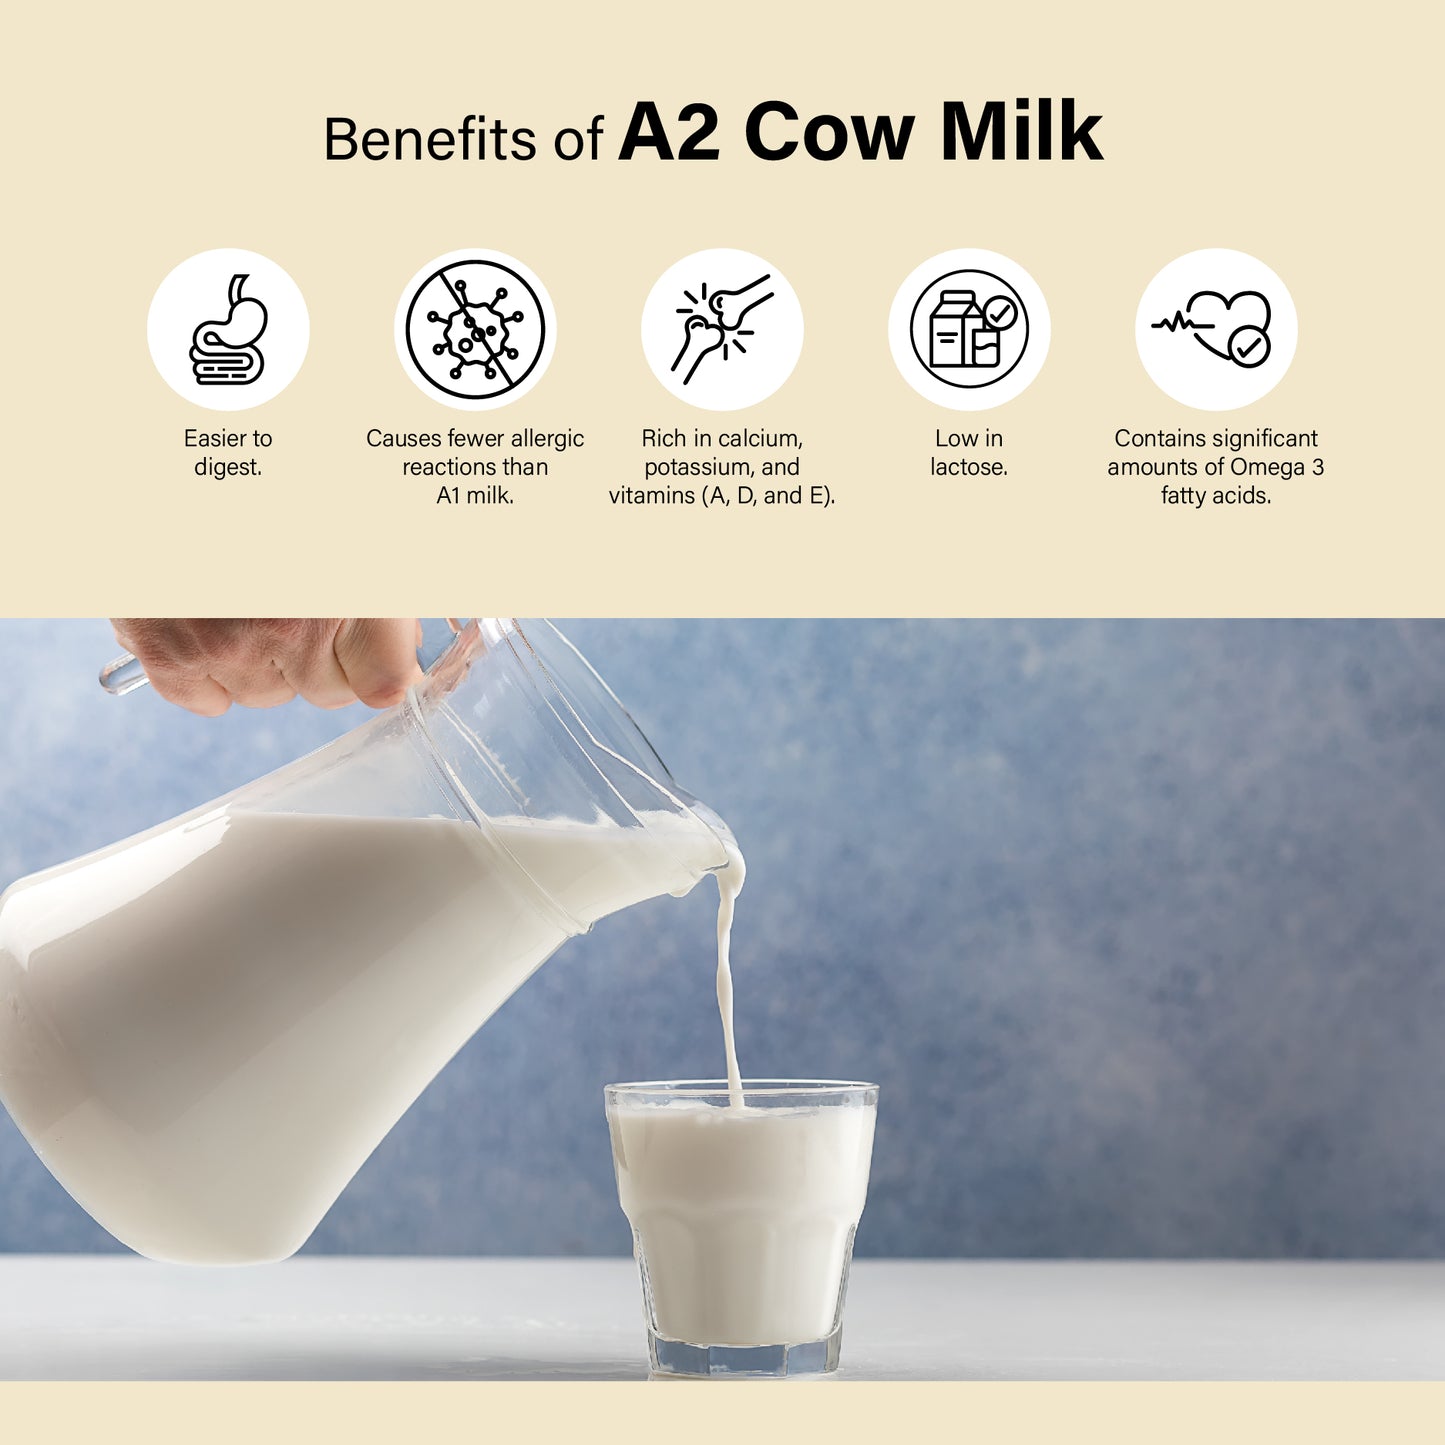 Benefits of A2 Cow Milk